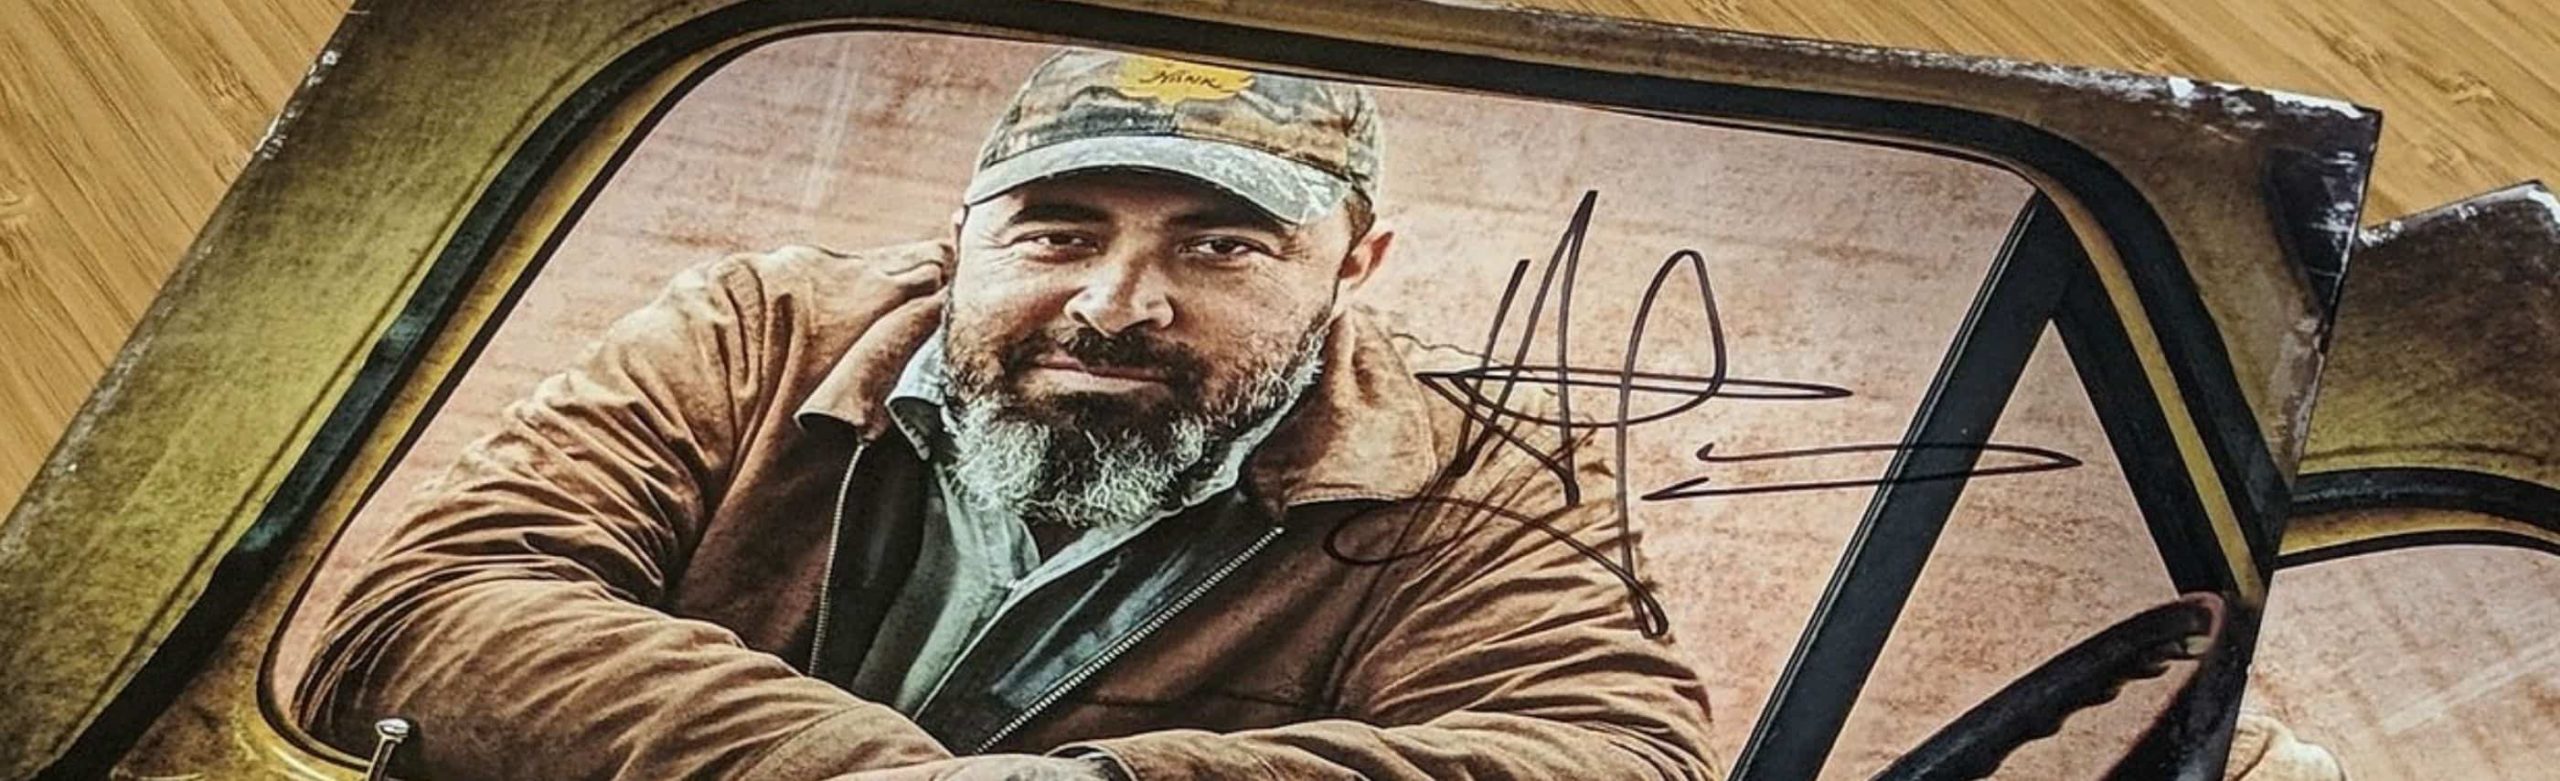 Win Tickets to Aaron Lewis at the Wilma Plus Autographed Posters Image